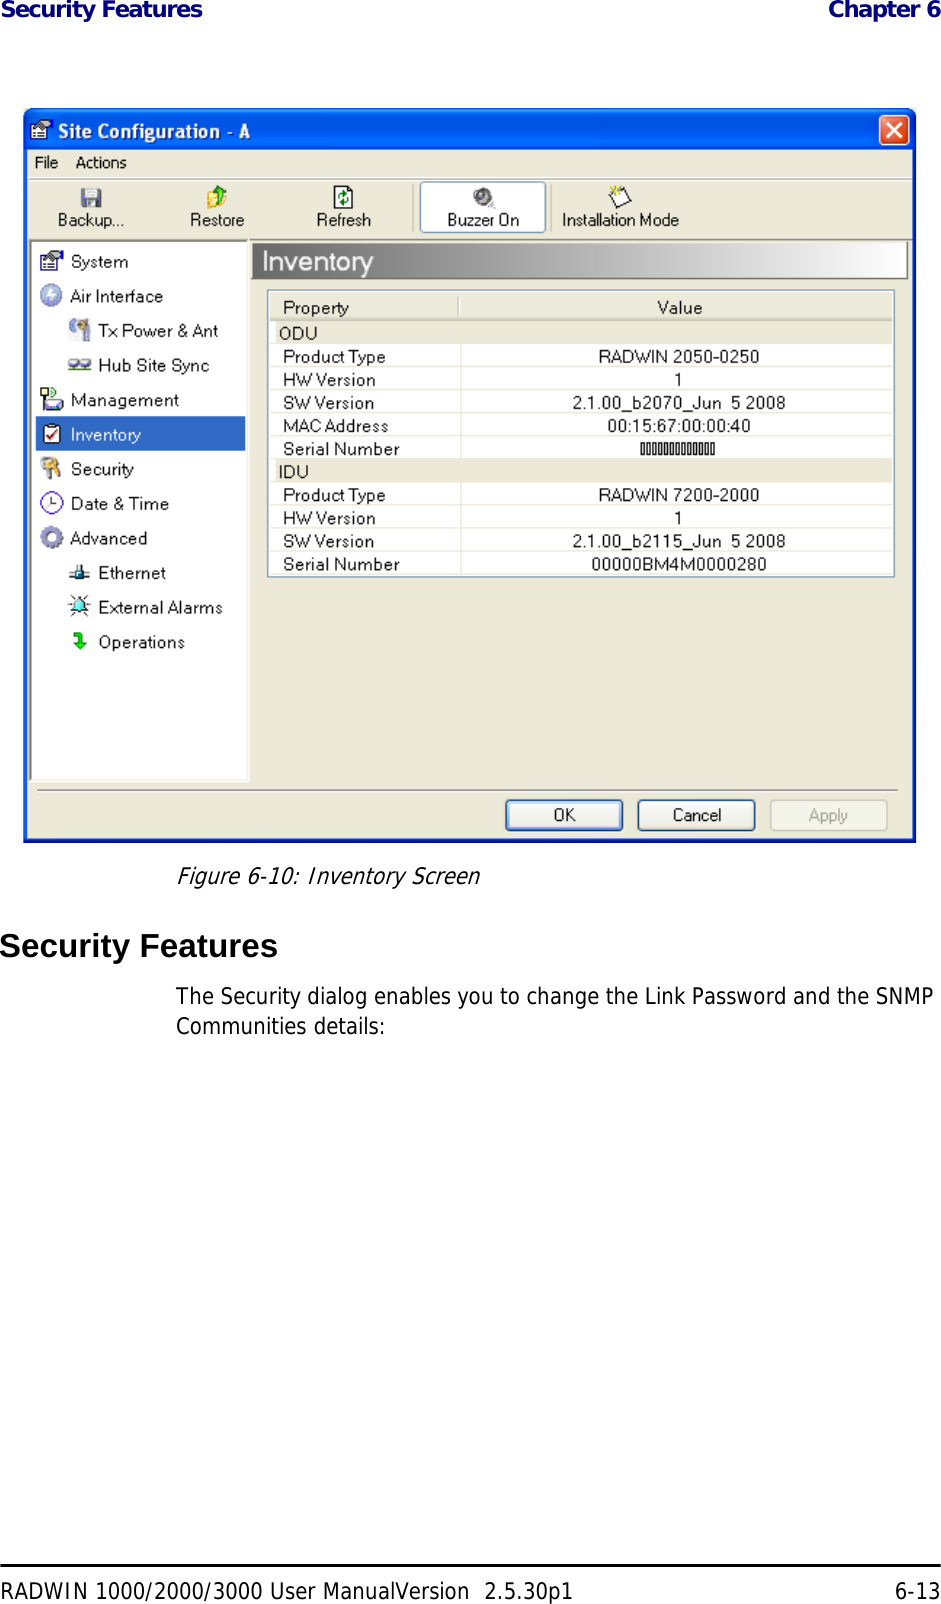 Security Features  Chapter 6RADWIN 1000/2000/3000 User ManualVersion  2.5.30p1 6-13Figure 6-10: Inventory ScreenSecurity FeaturesThe Security dialog enables you to change the Link Password and the SNMP Communities details: